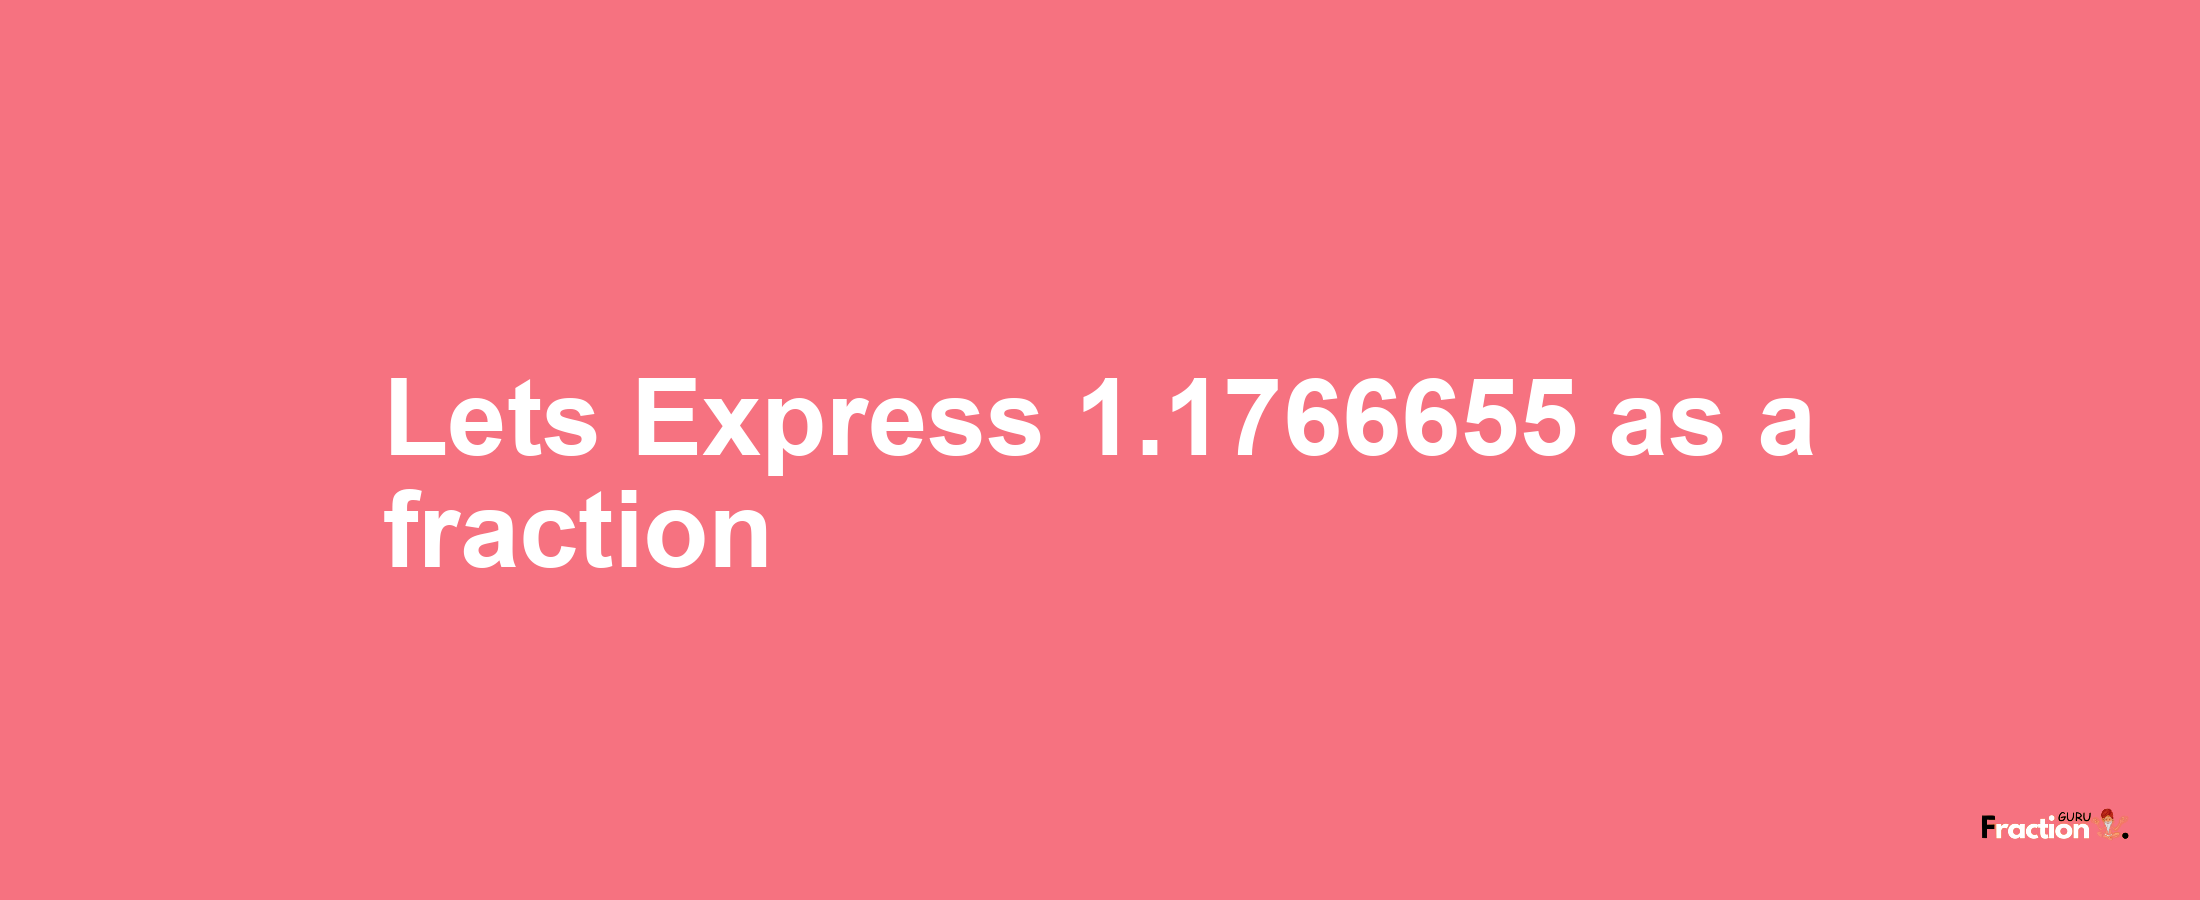 Lets Express 1.1766655 as afraction